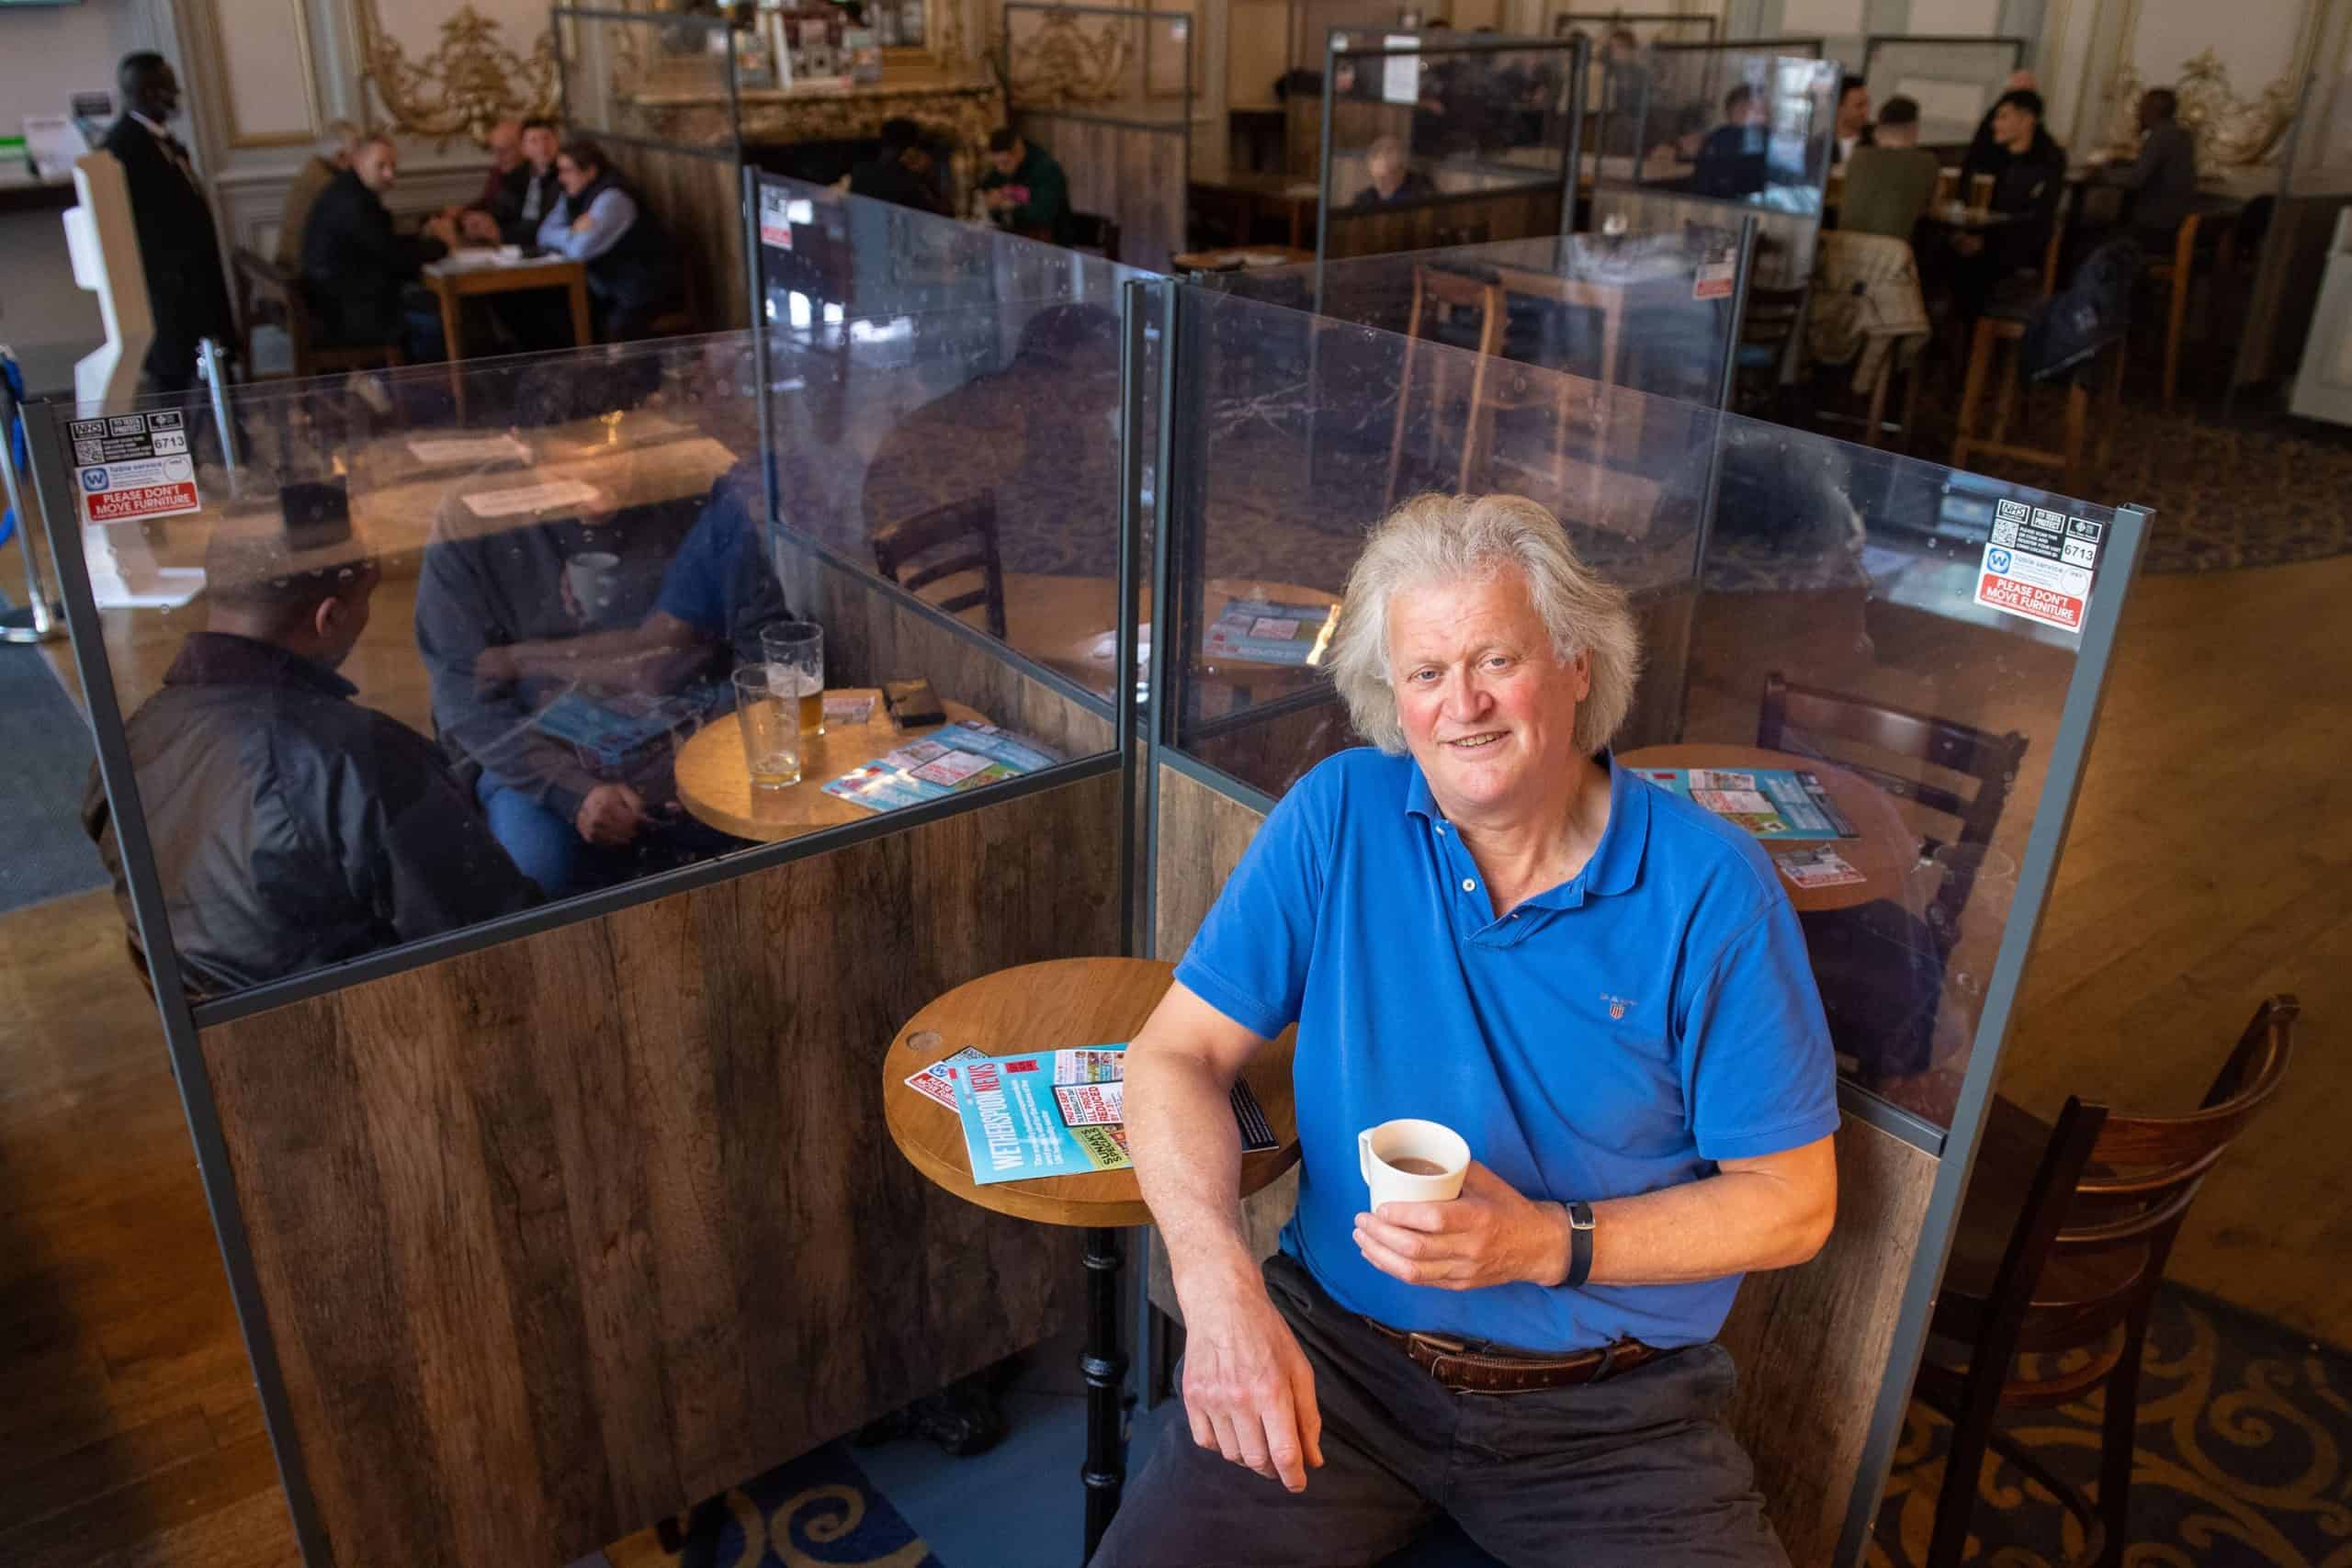 Wetherspoons Brexiteer boss Tim Martin says he could see himself voting Labour